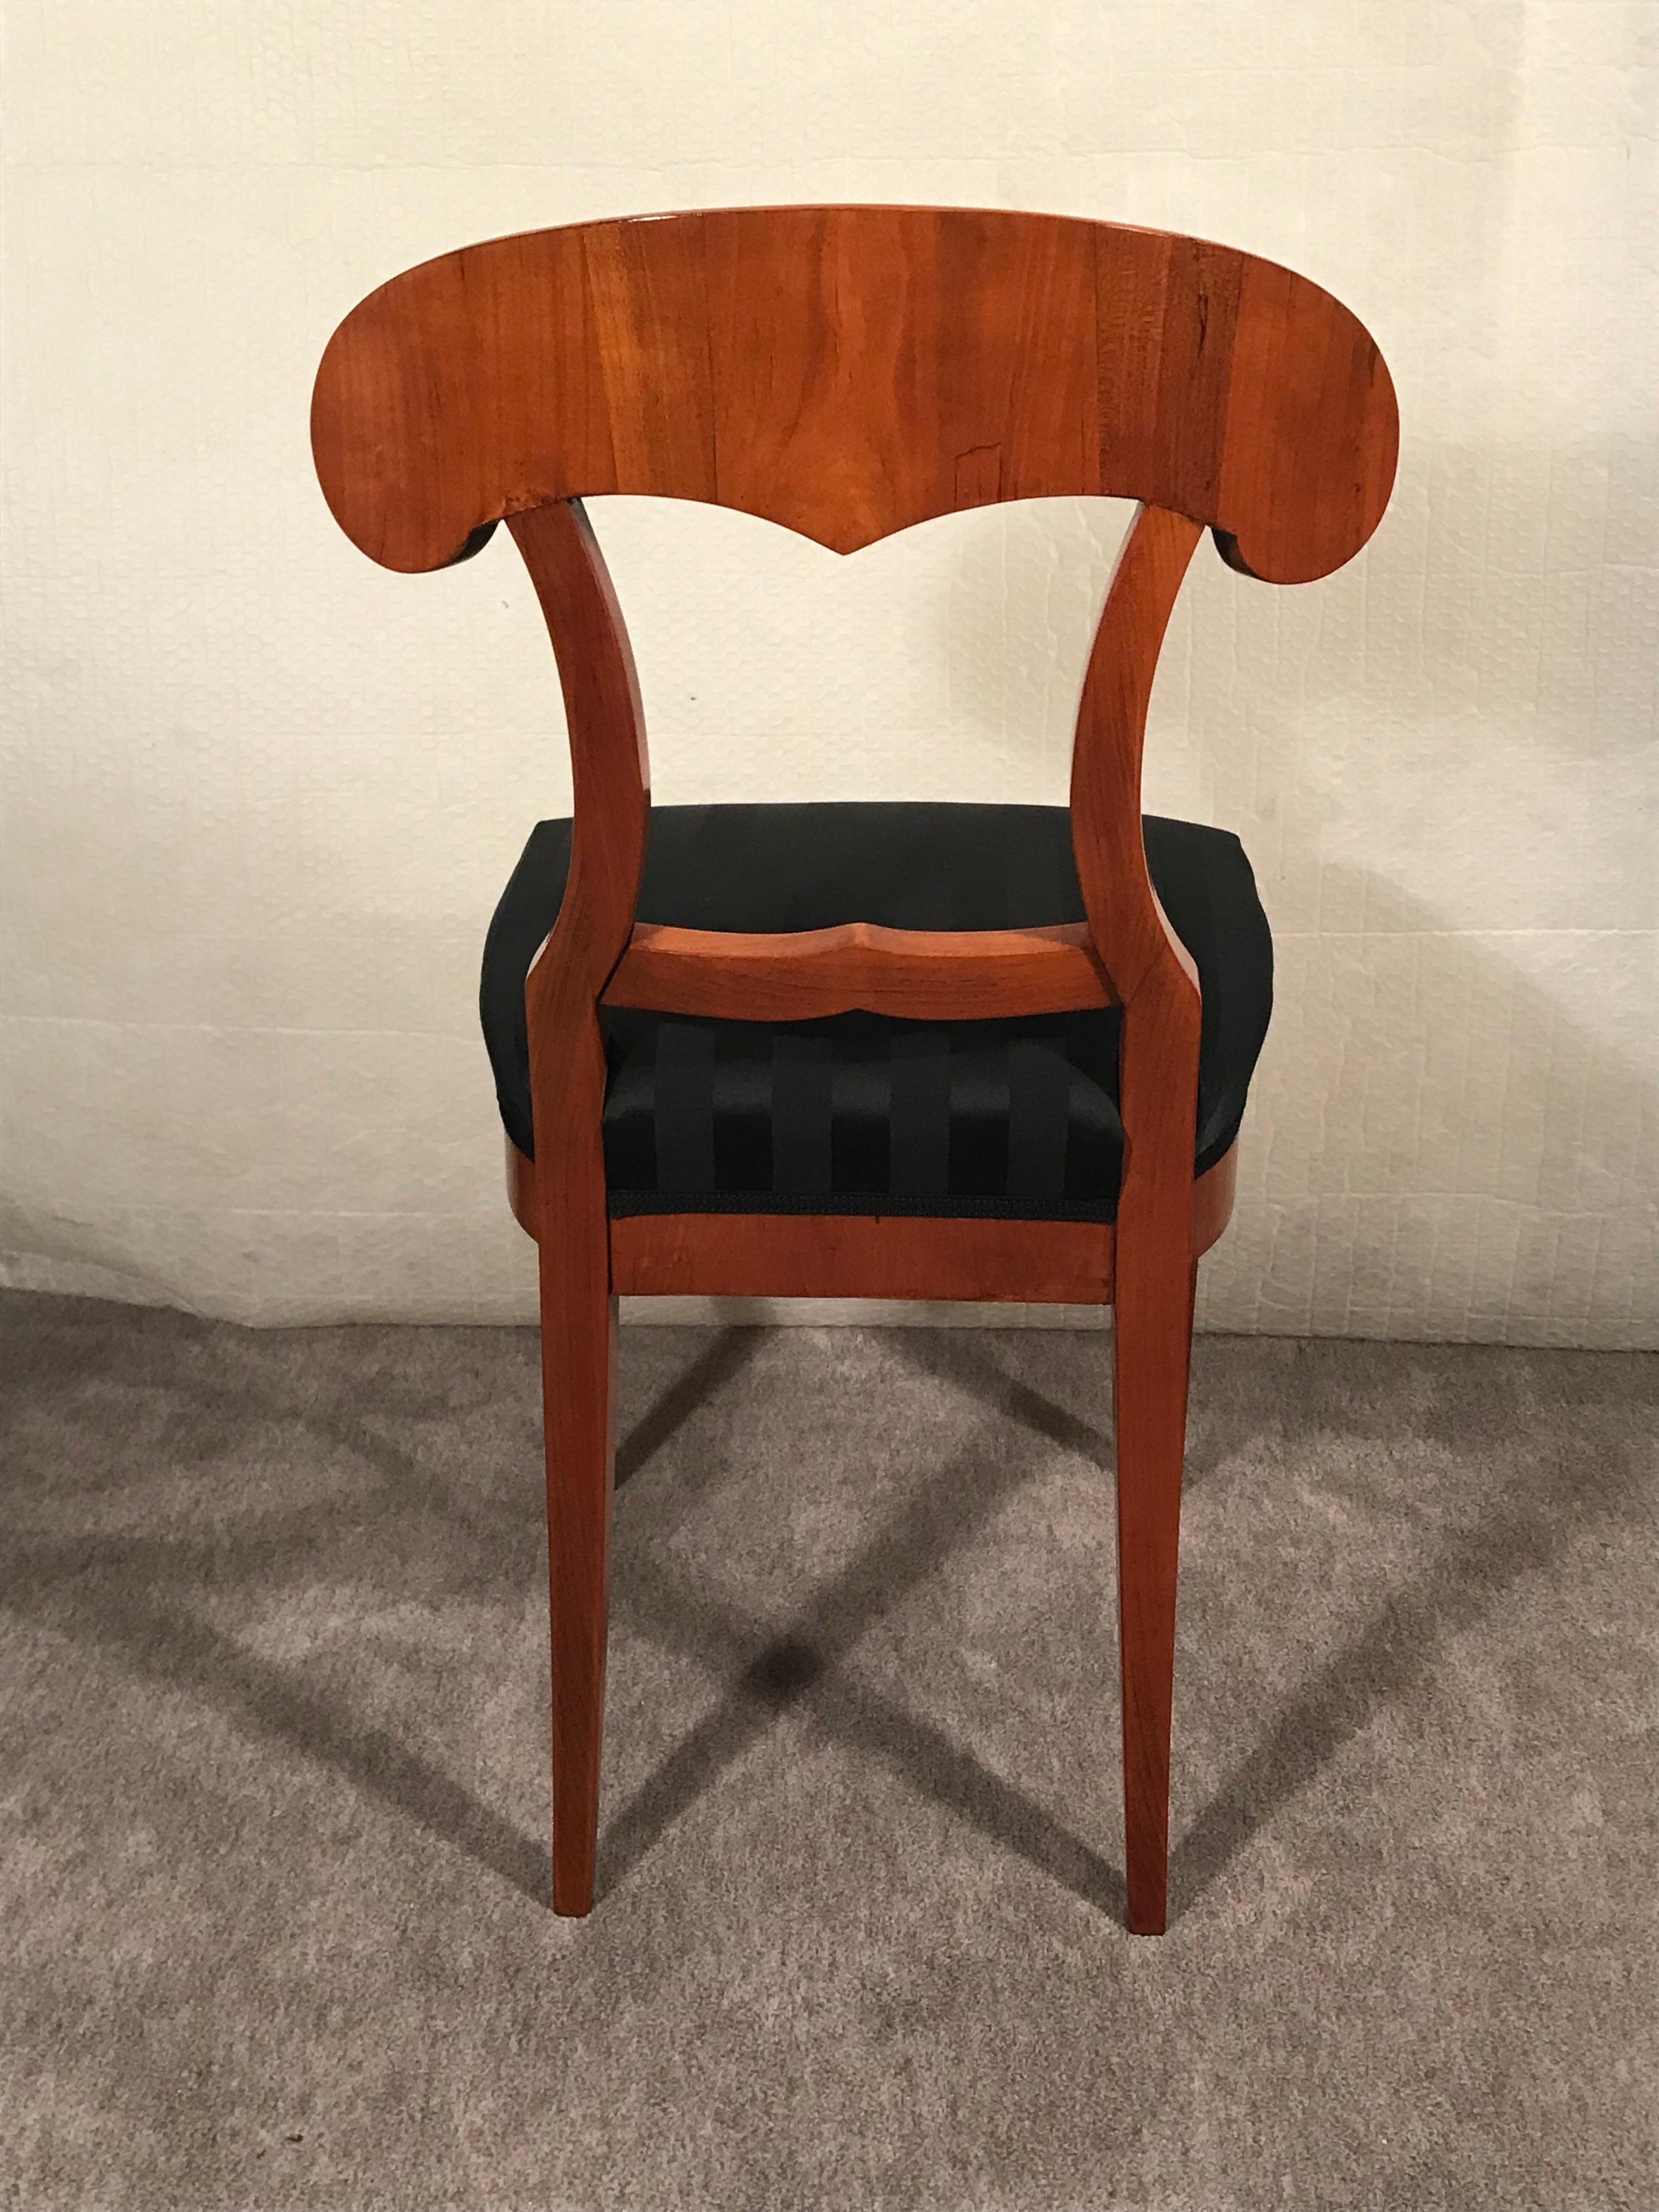 Set of Six Biedermeier Chairs, 1820, Cherry In Good Condition For Sale In Belmont, MA